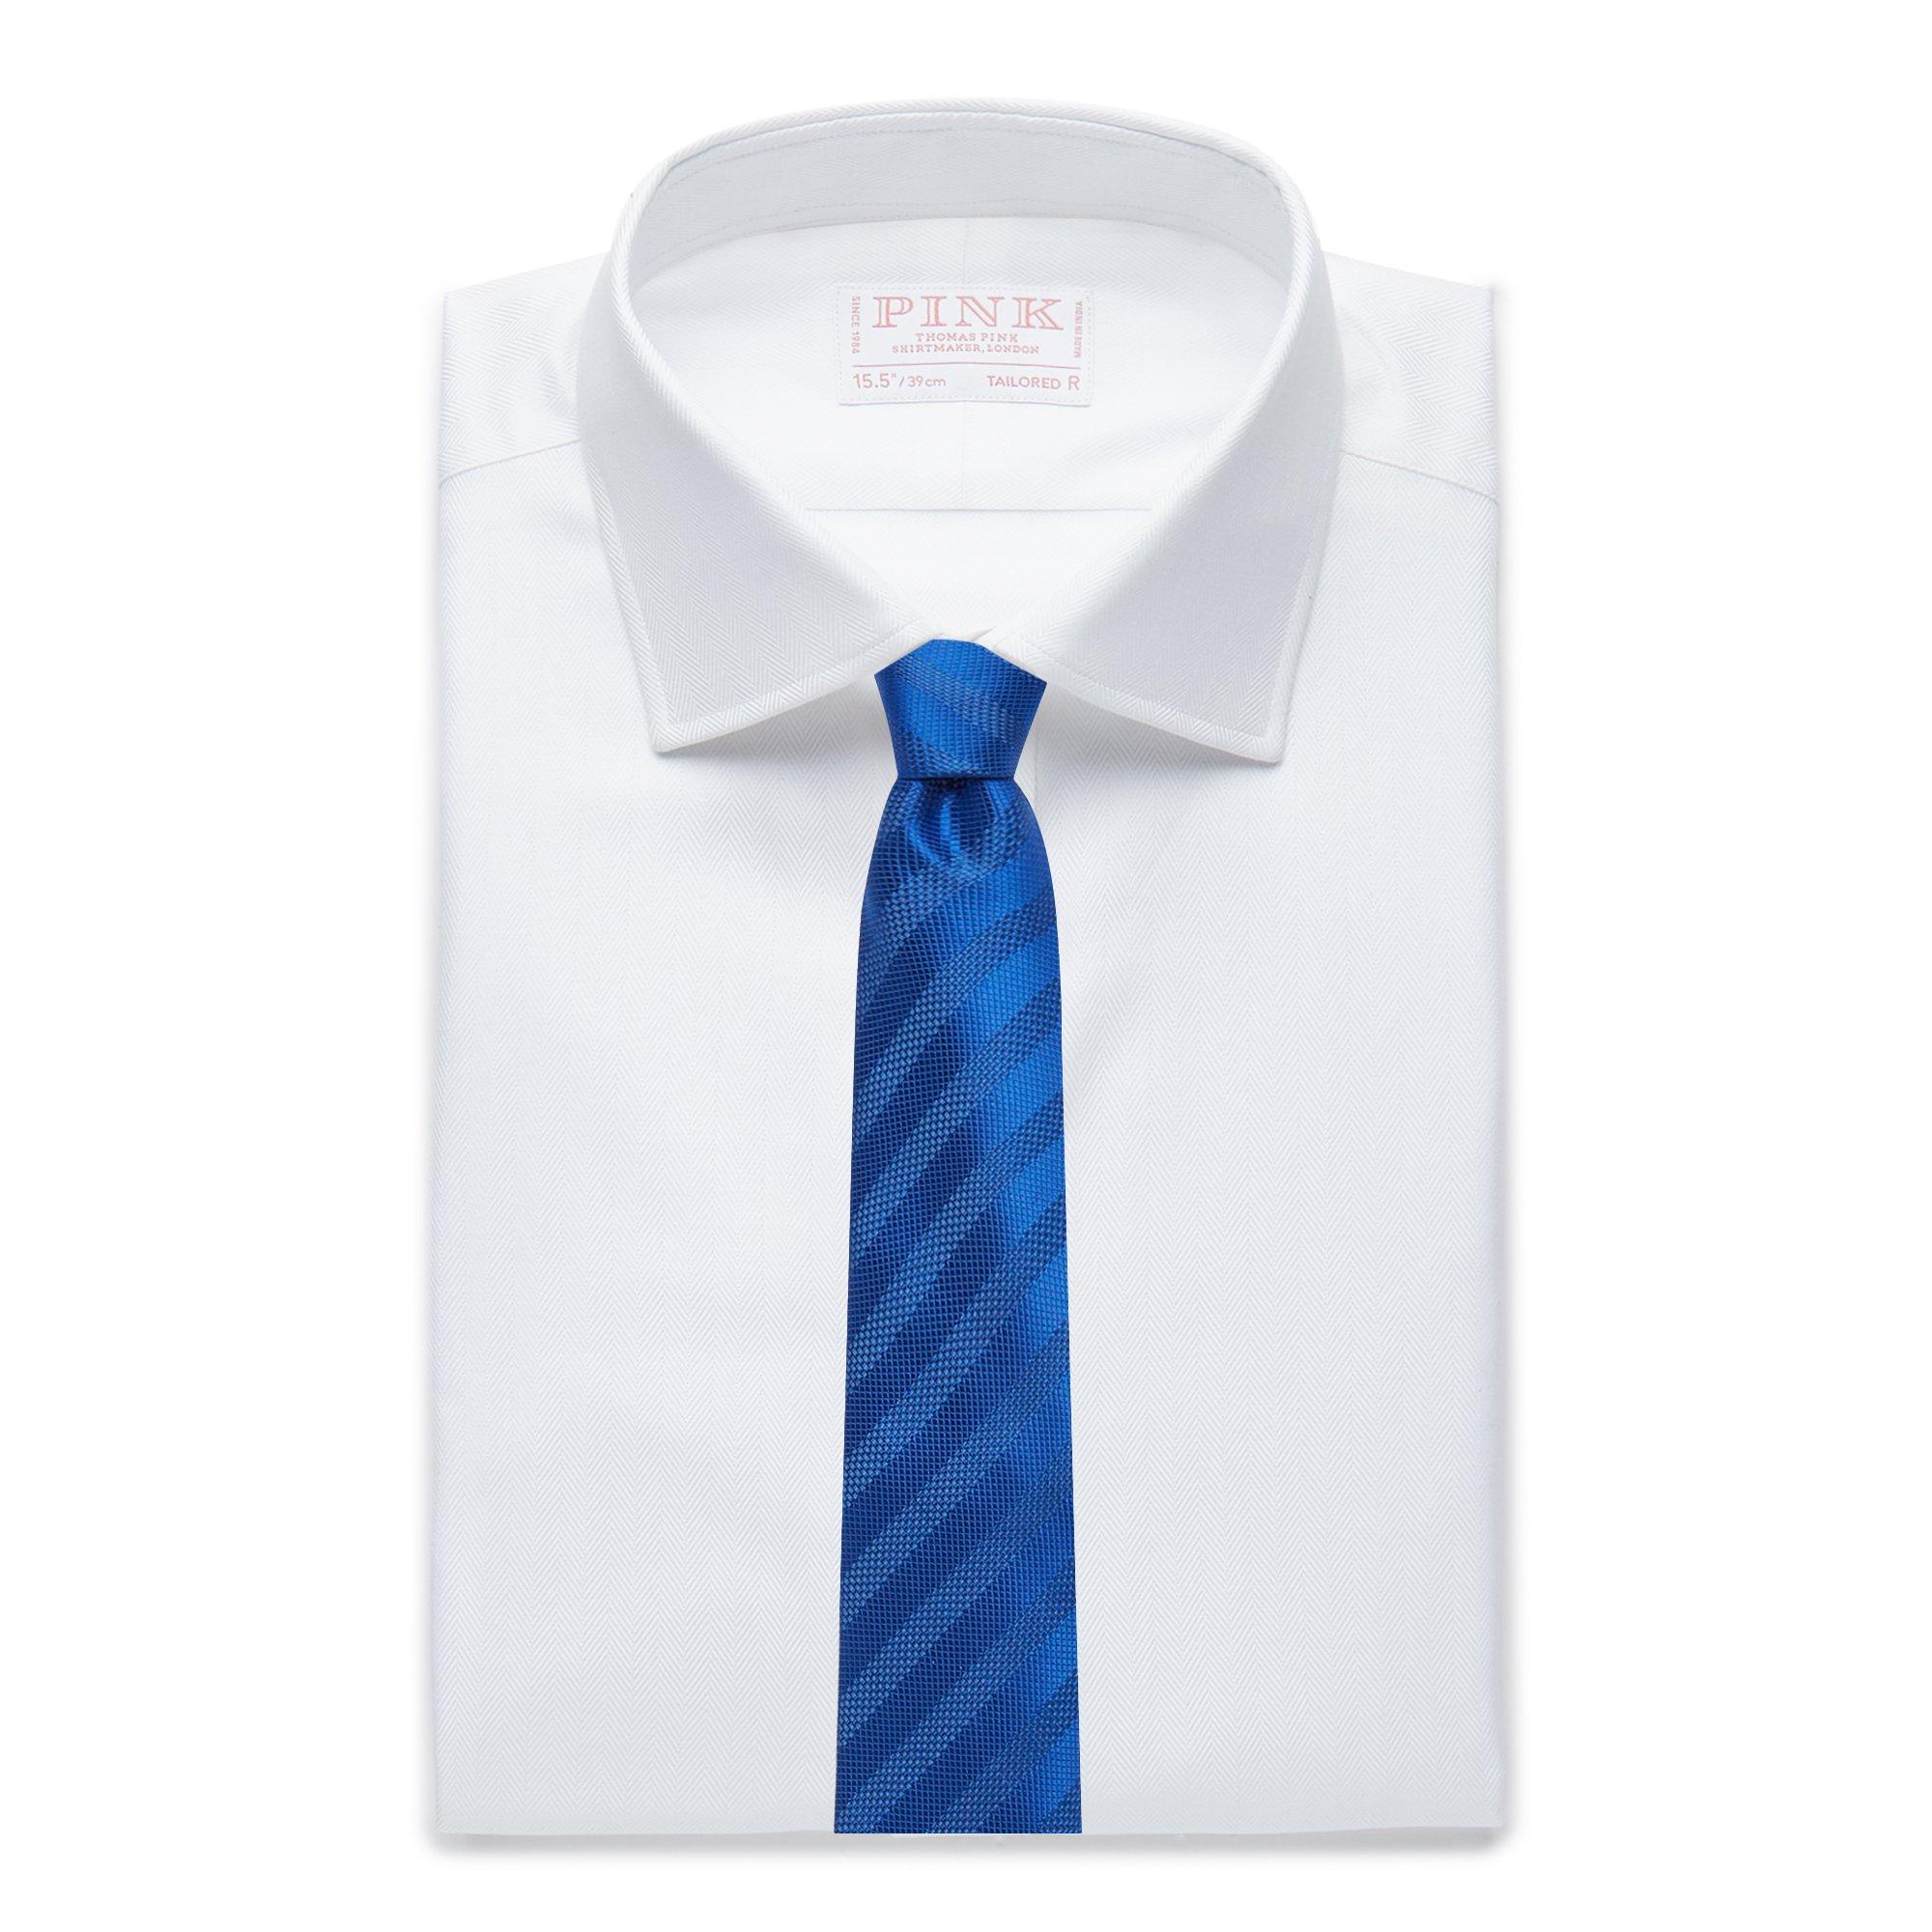 Thomas Pink: Tie not required, The Independent Shirt